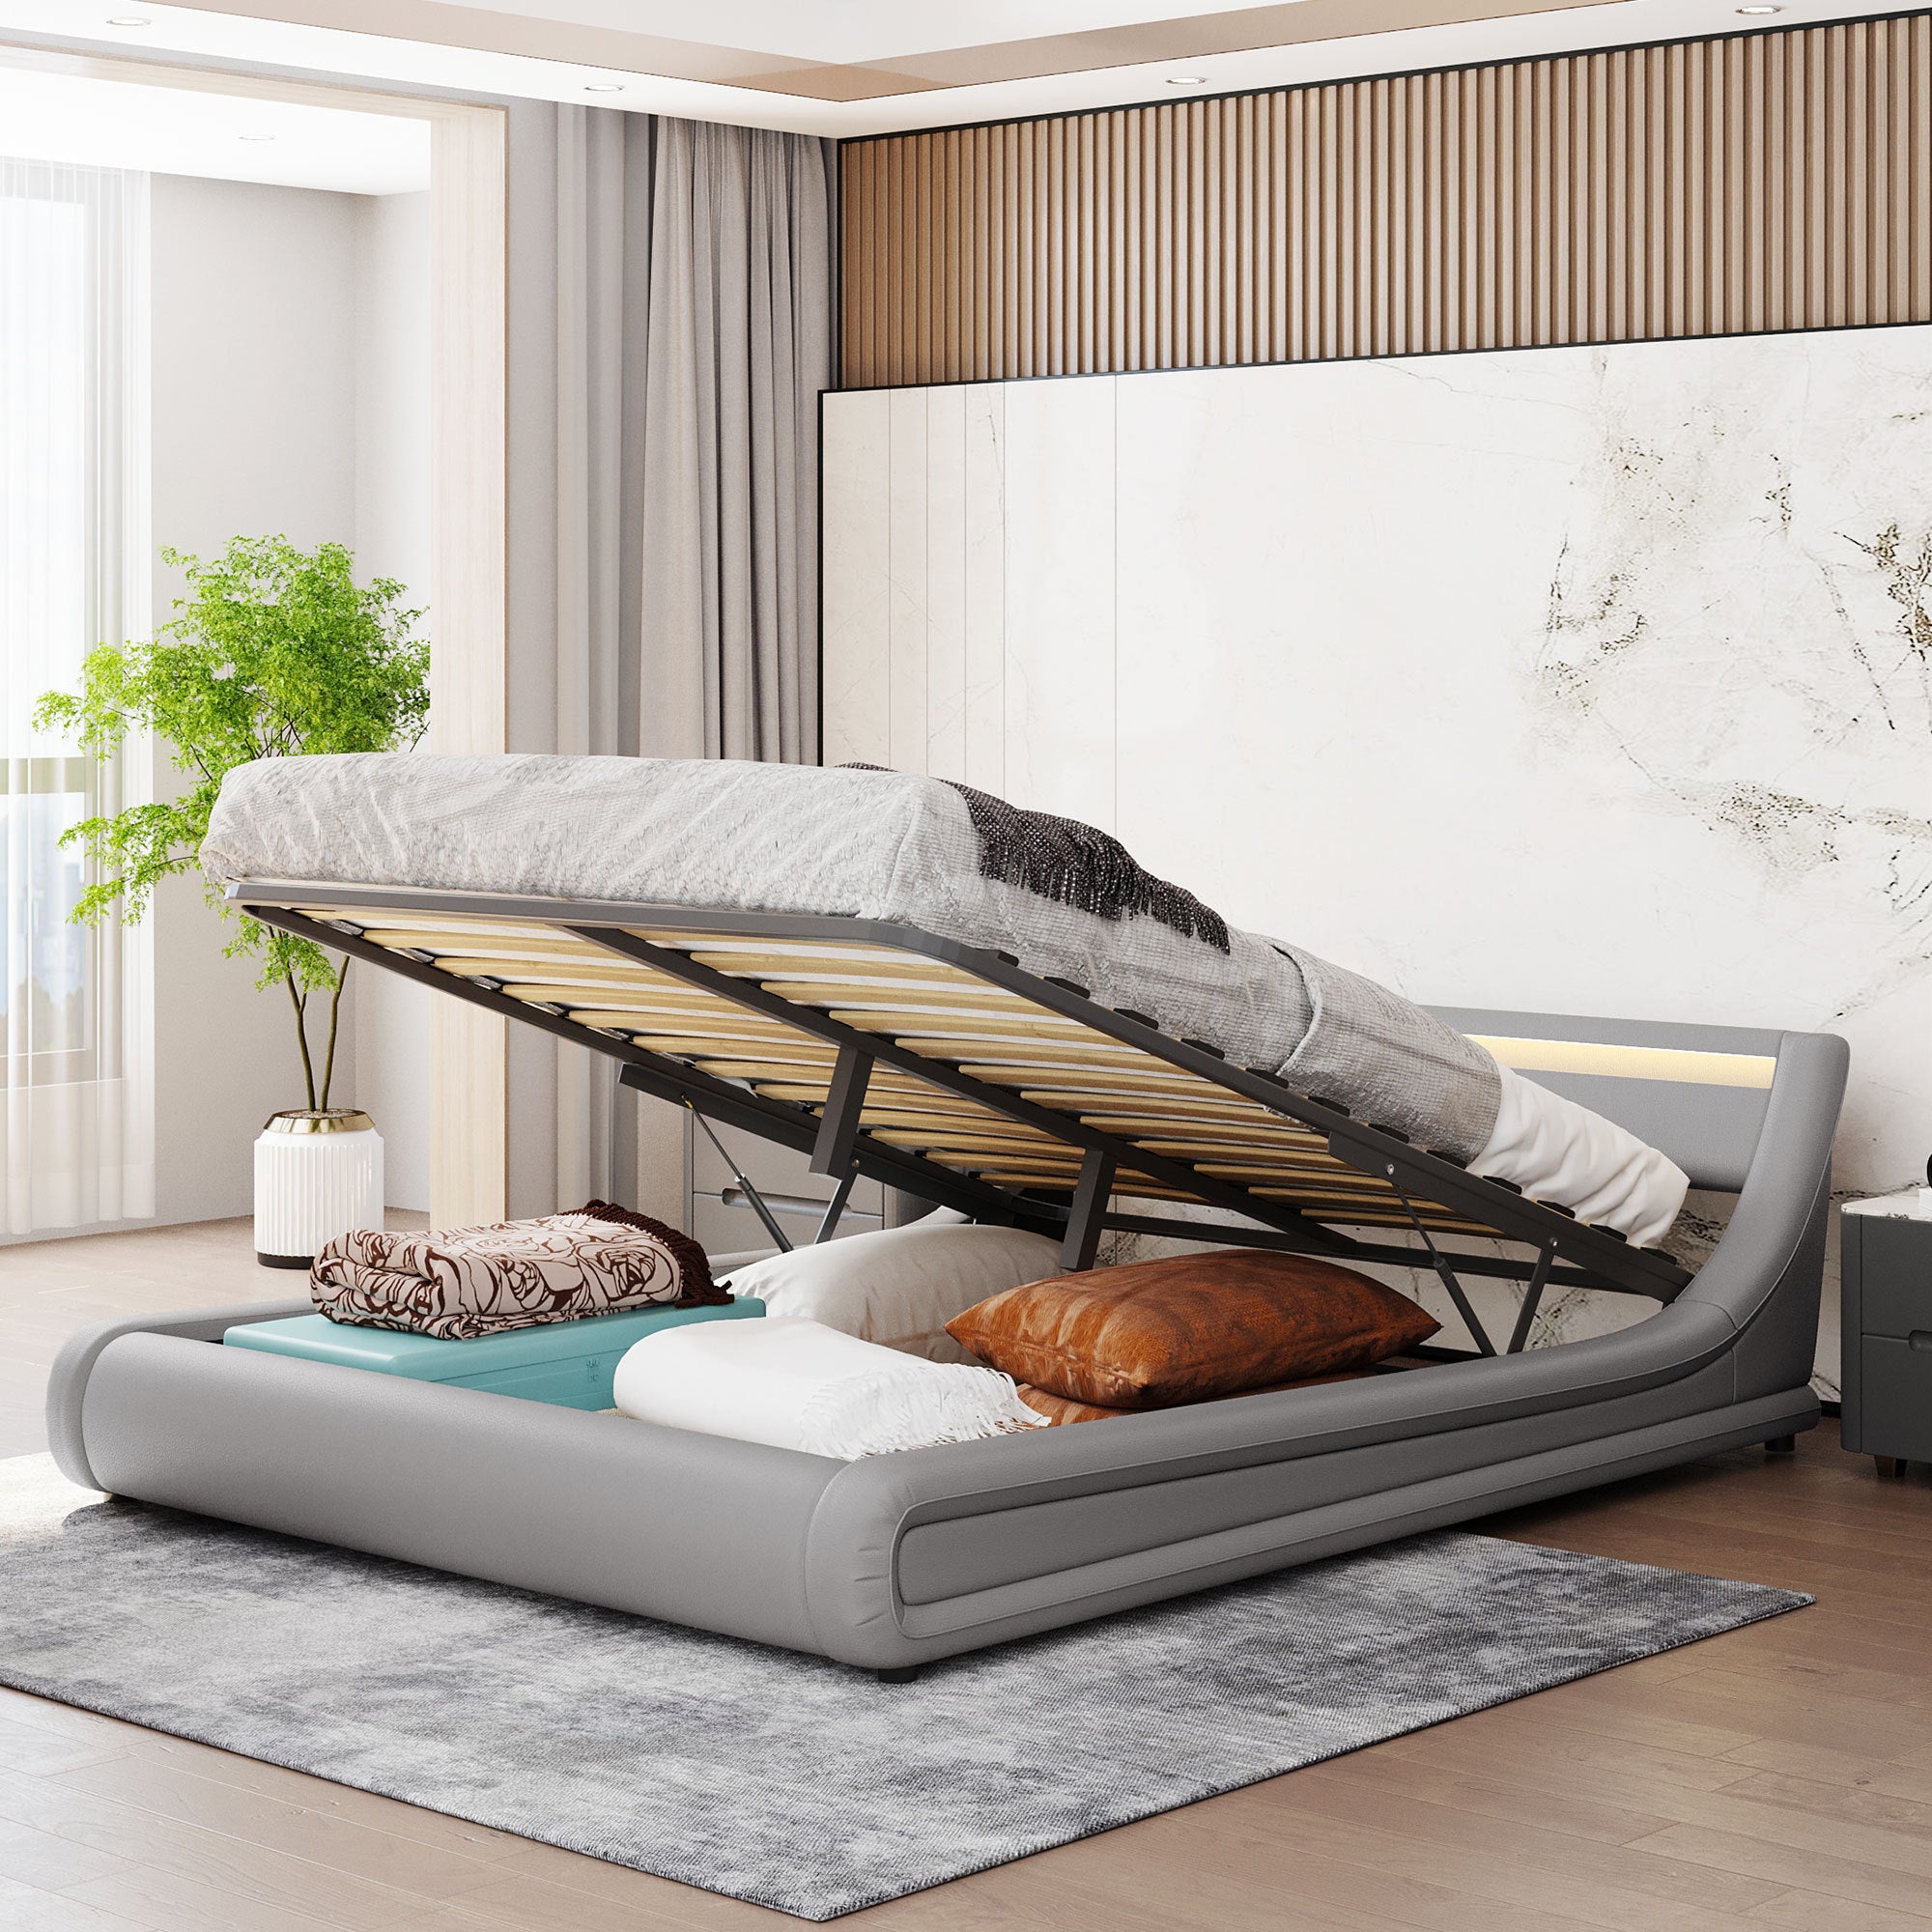 Upholstered-Faux-Leather-Platform-bed-with-a-Hydraulic-Storage-System-with-LED-Light-Headboard-Bed-Frame-with-Slatted-Queen-Size-Beds-&-Bed-Frames